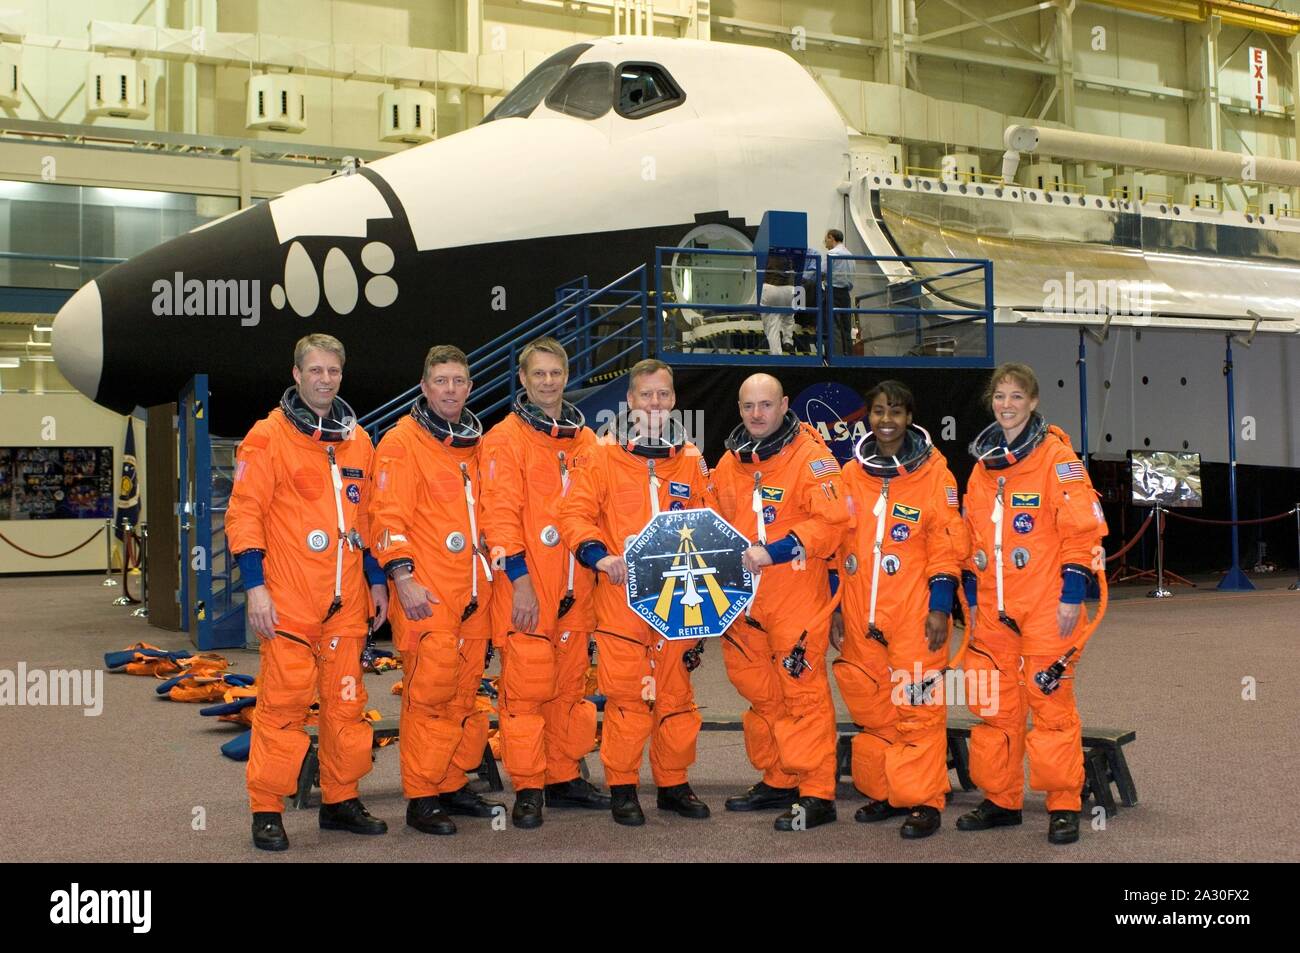 ***FILE PHOTO*** Archive Image relating to the film, Lucy In The Sky, loosely based on the events surrounding the love triangle involving Astronaut Lisa Nowak. FILE: In this photo released by NASA, The crew members assigned to STS-121 take a break from training for a group shot in the Johnson Space Center's Space Vehicle Mockup Facility in Houston, Texas on March 21, 2006. From the left are astronauts Thomas Reiter of the European Space Agency, Michael E. Fossum, Piers J. Sellers, Steven W. Lindsey, Mark E. Kelly, Stephanie D. Wilson and Lisa M. Nowak. Lindsey is mission commander and Kelly Stock Photo